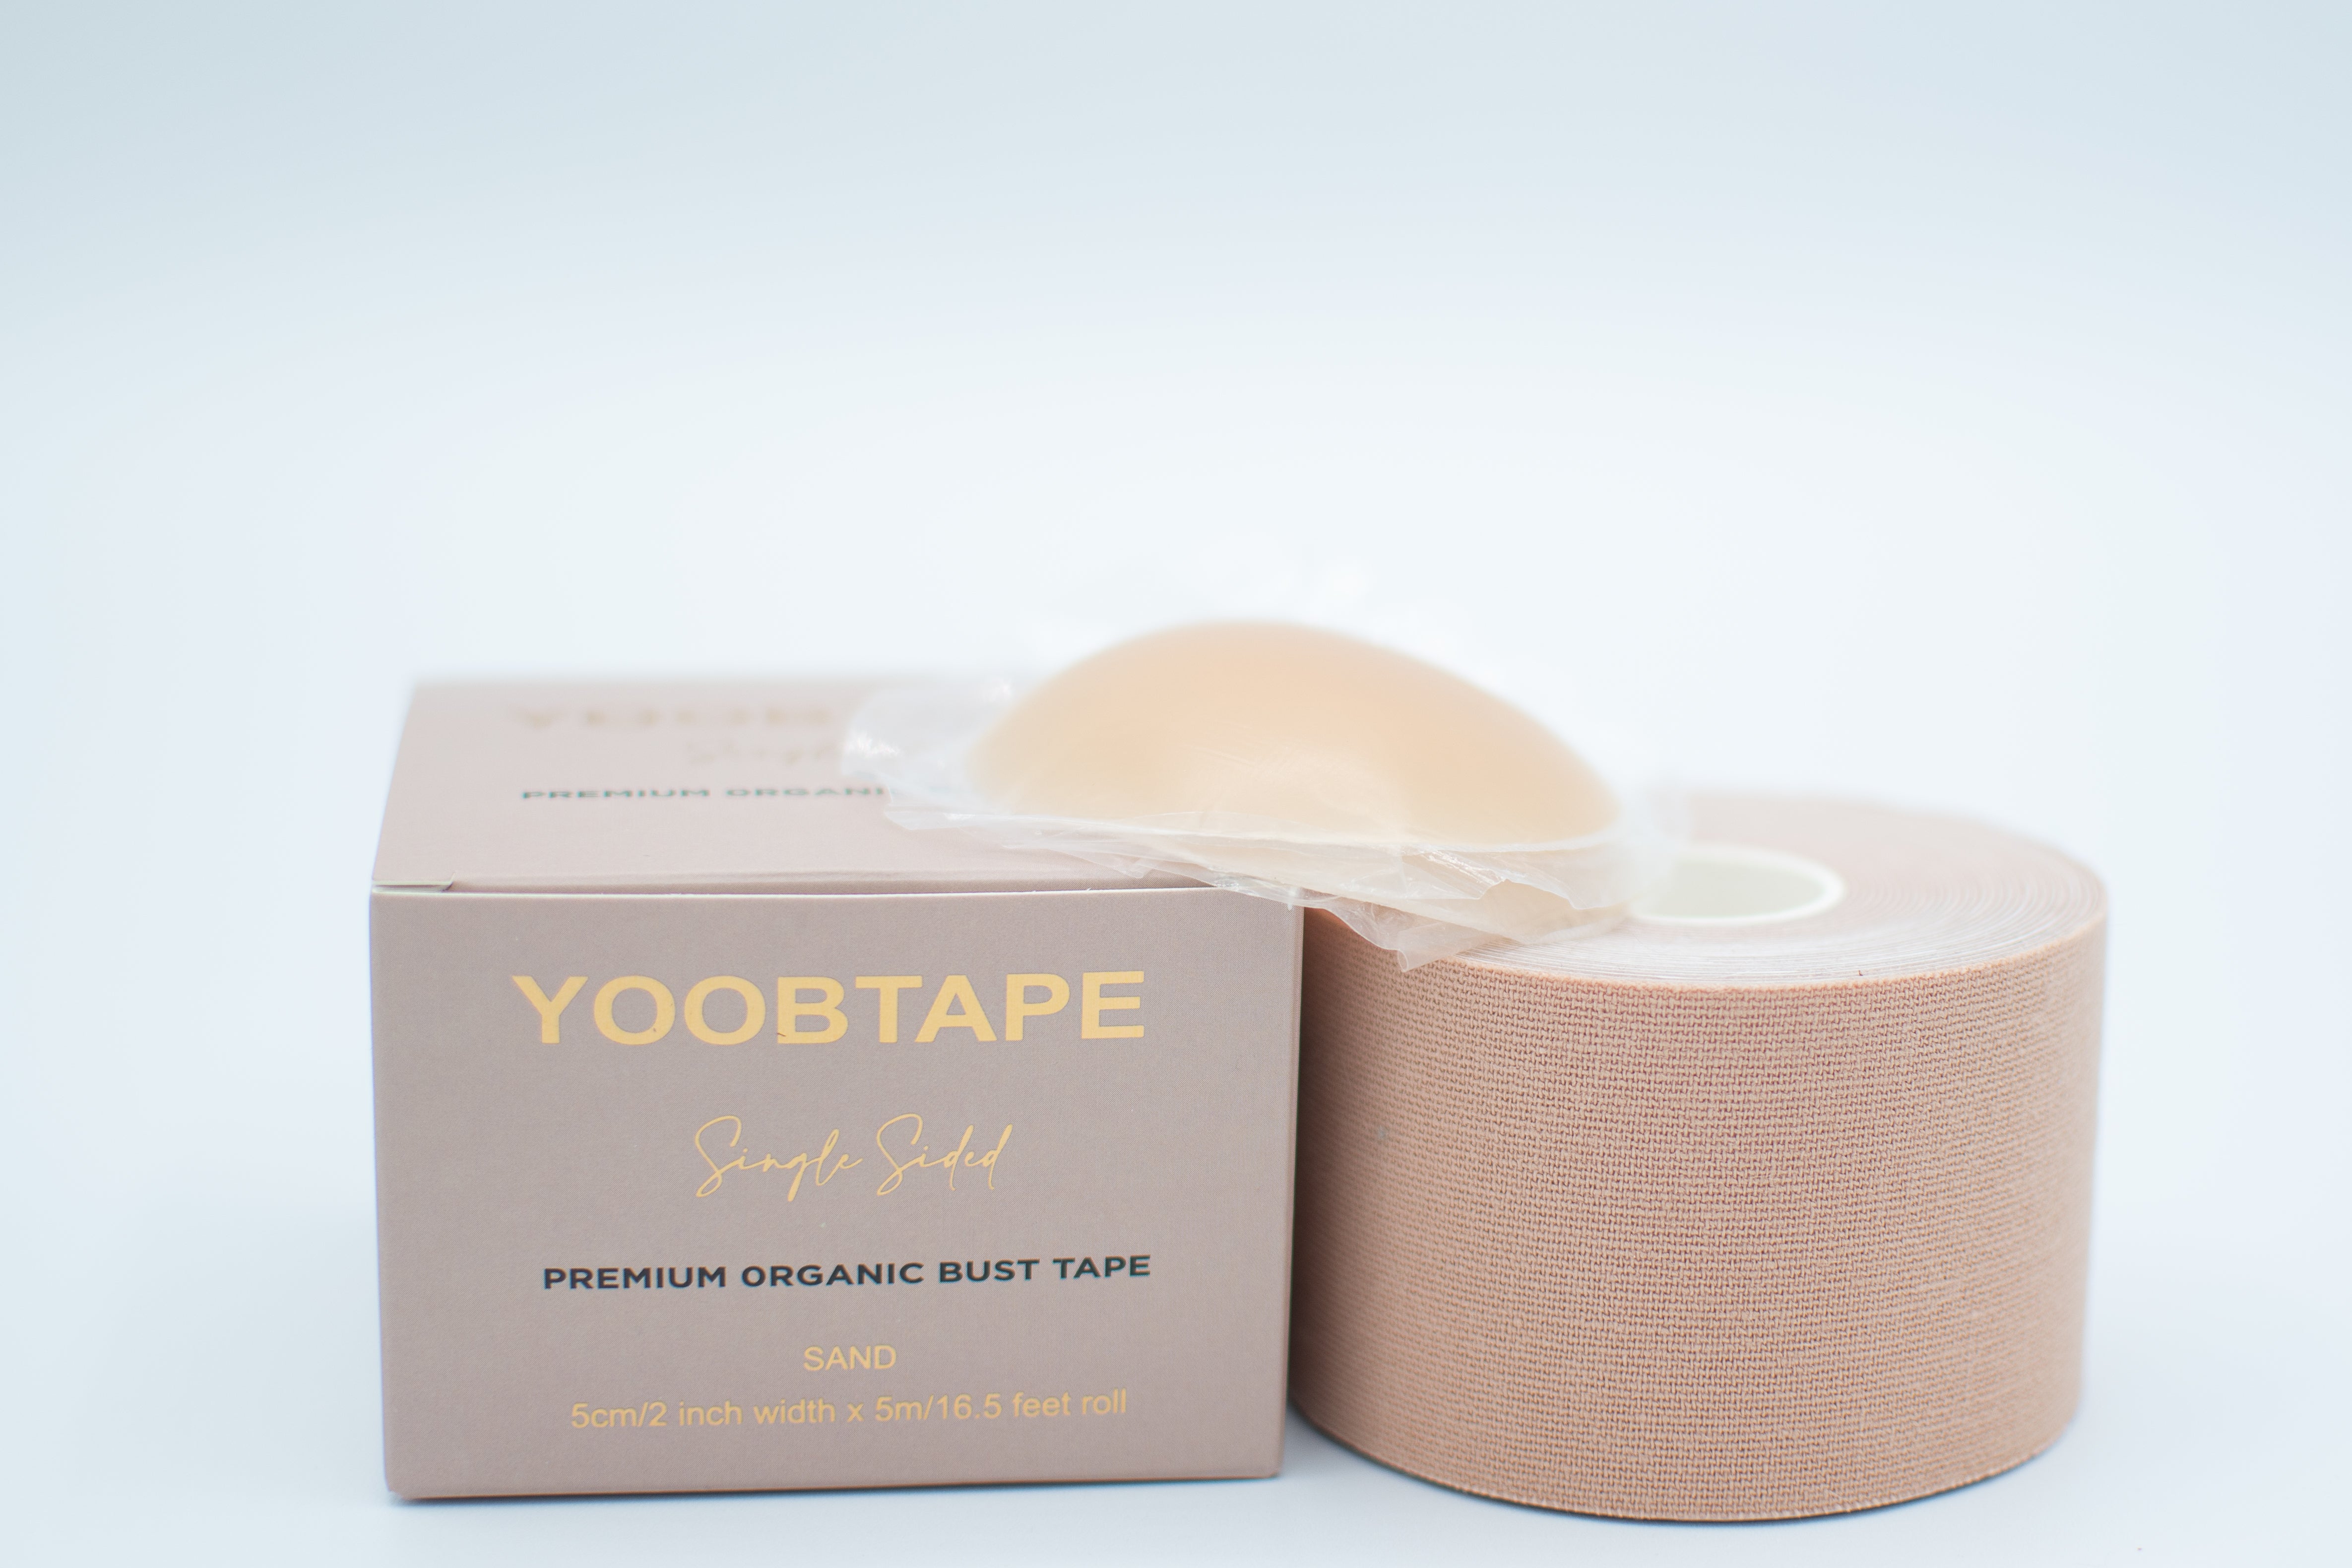 Boob Tape Premium Double Sided Bust Tape - Sand